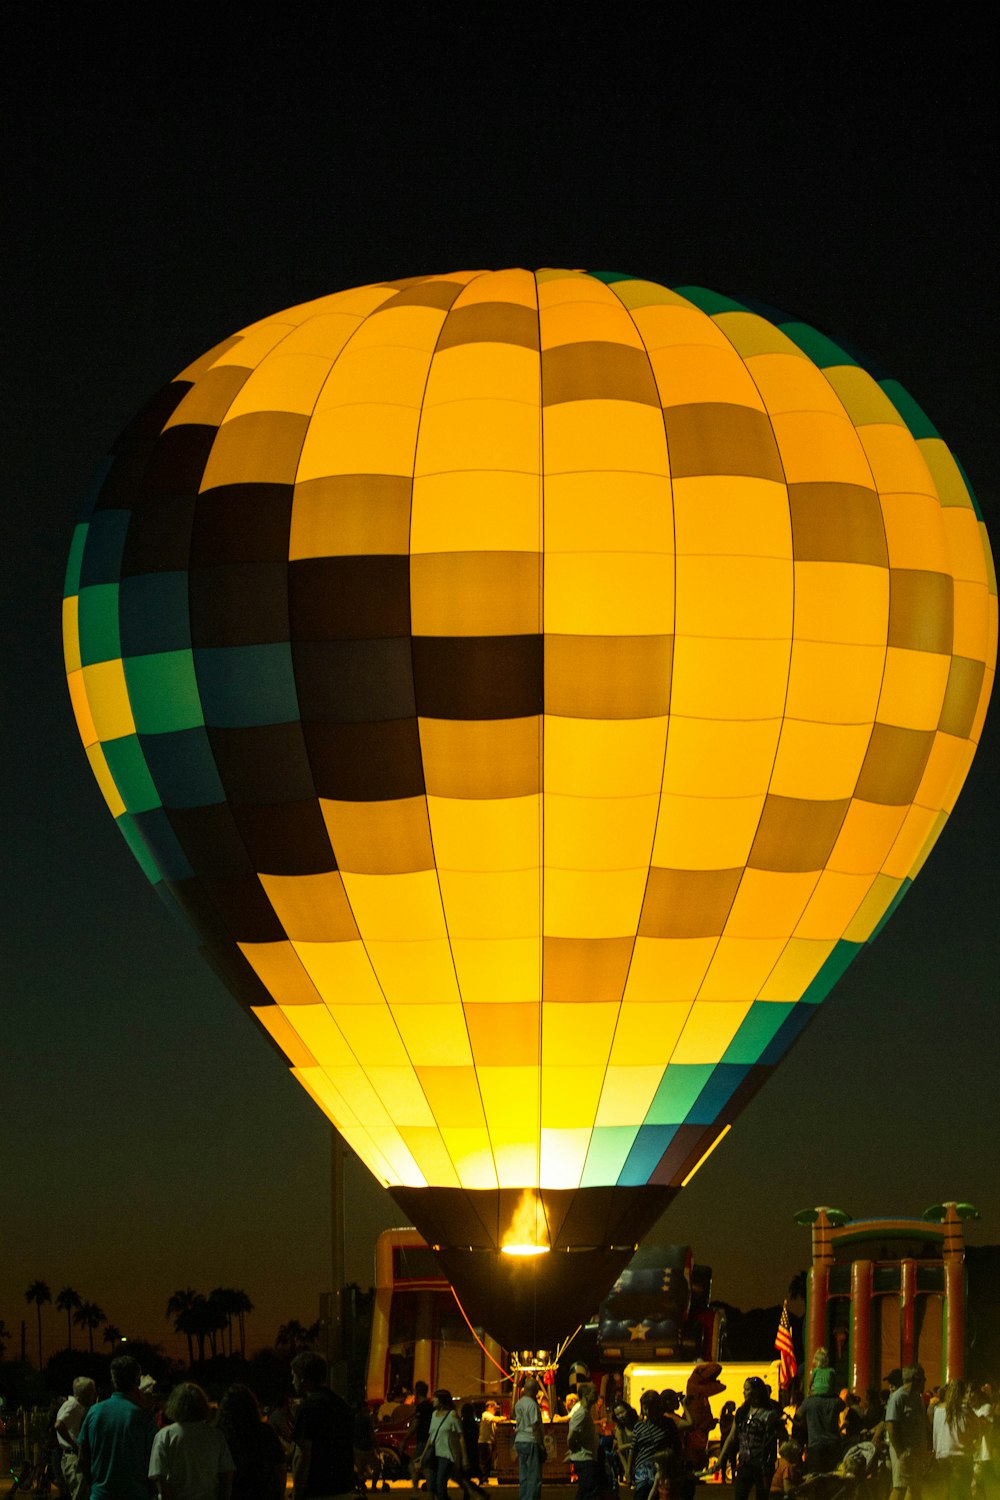 group of people in front of multicolored hot air balloon